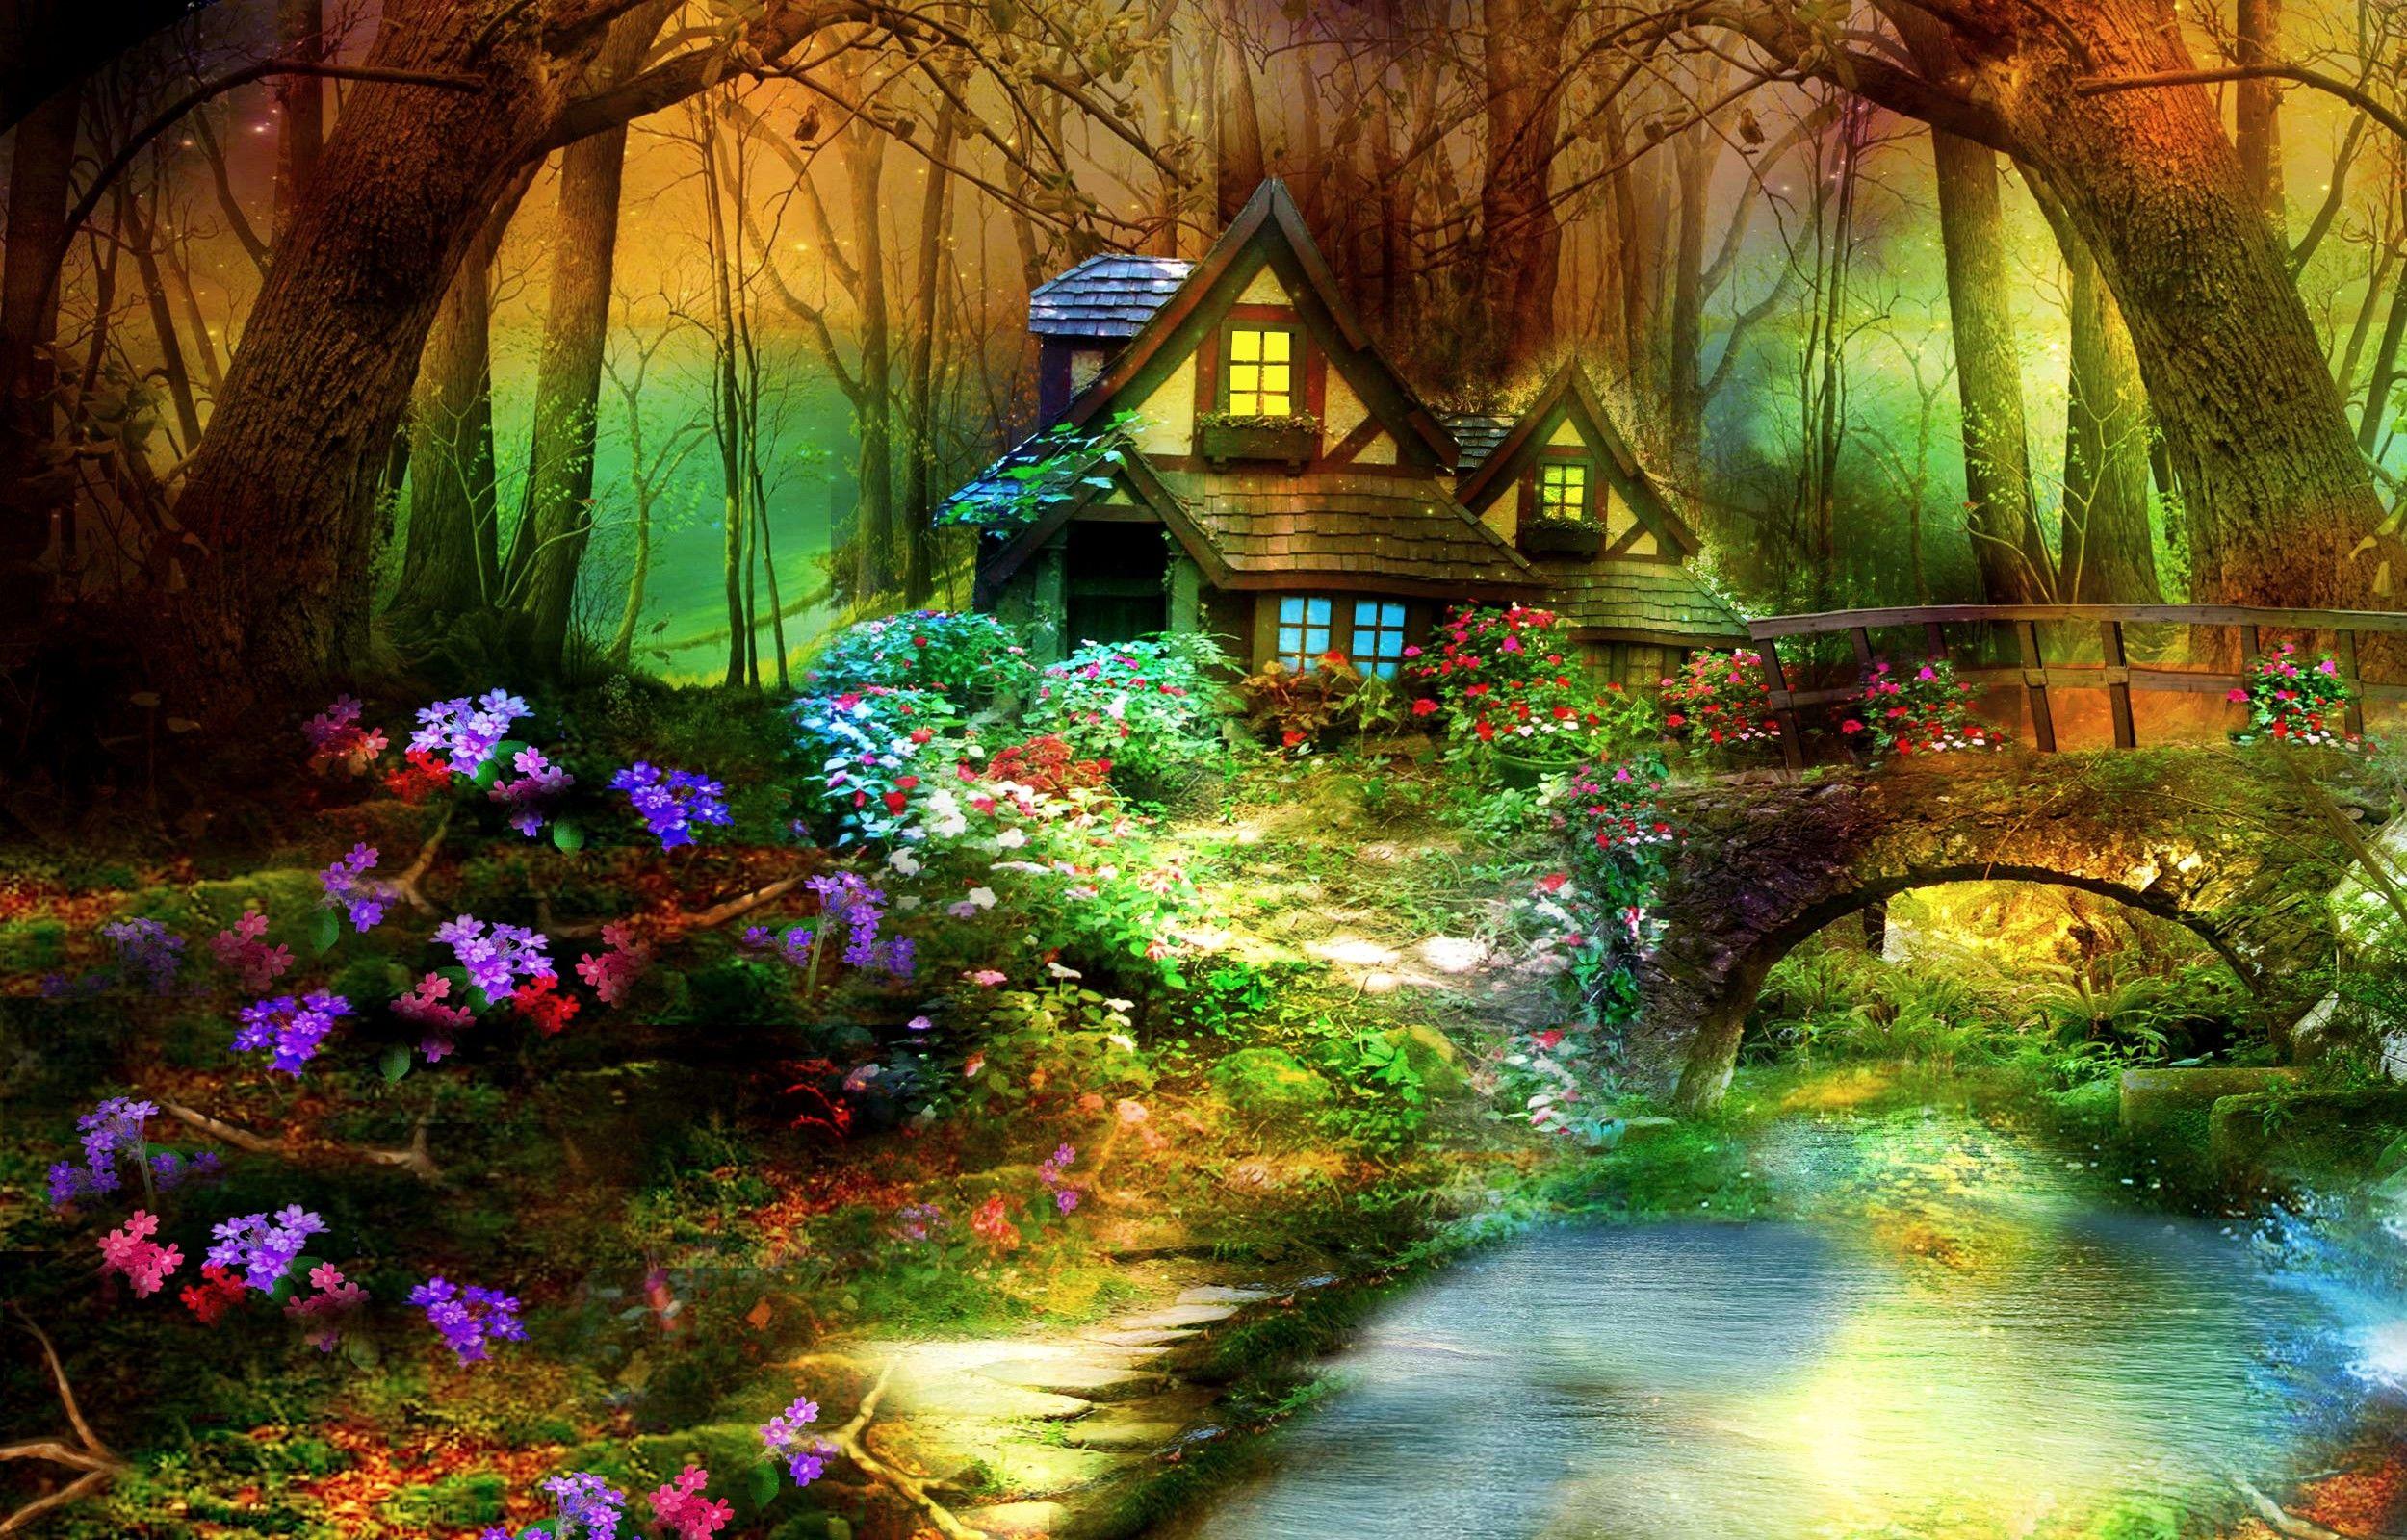 Magic Forest Wallpaper in High Definition